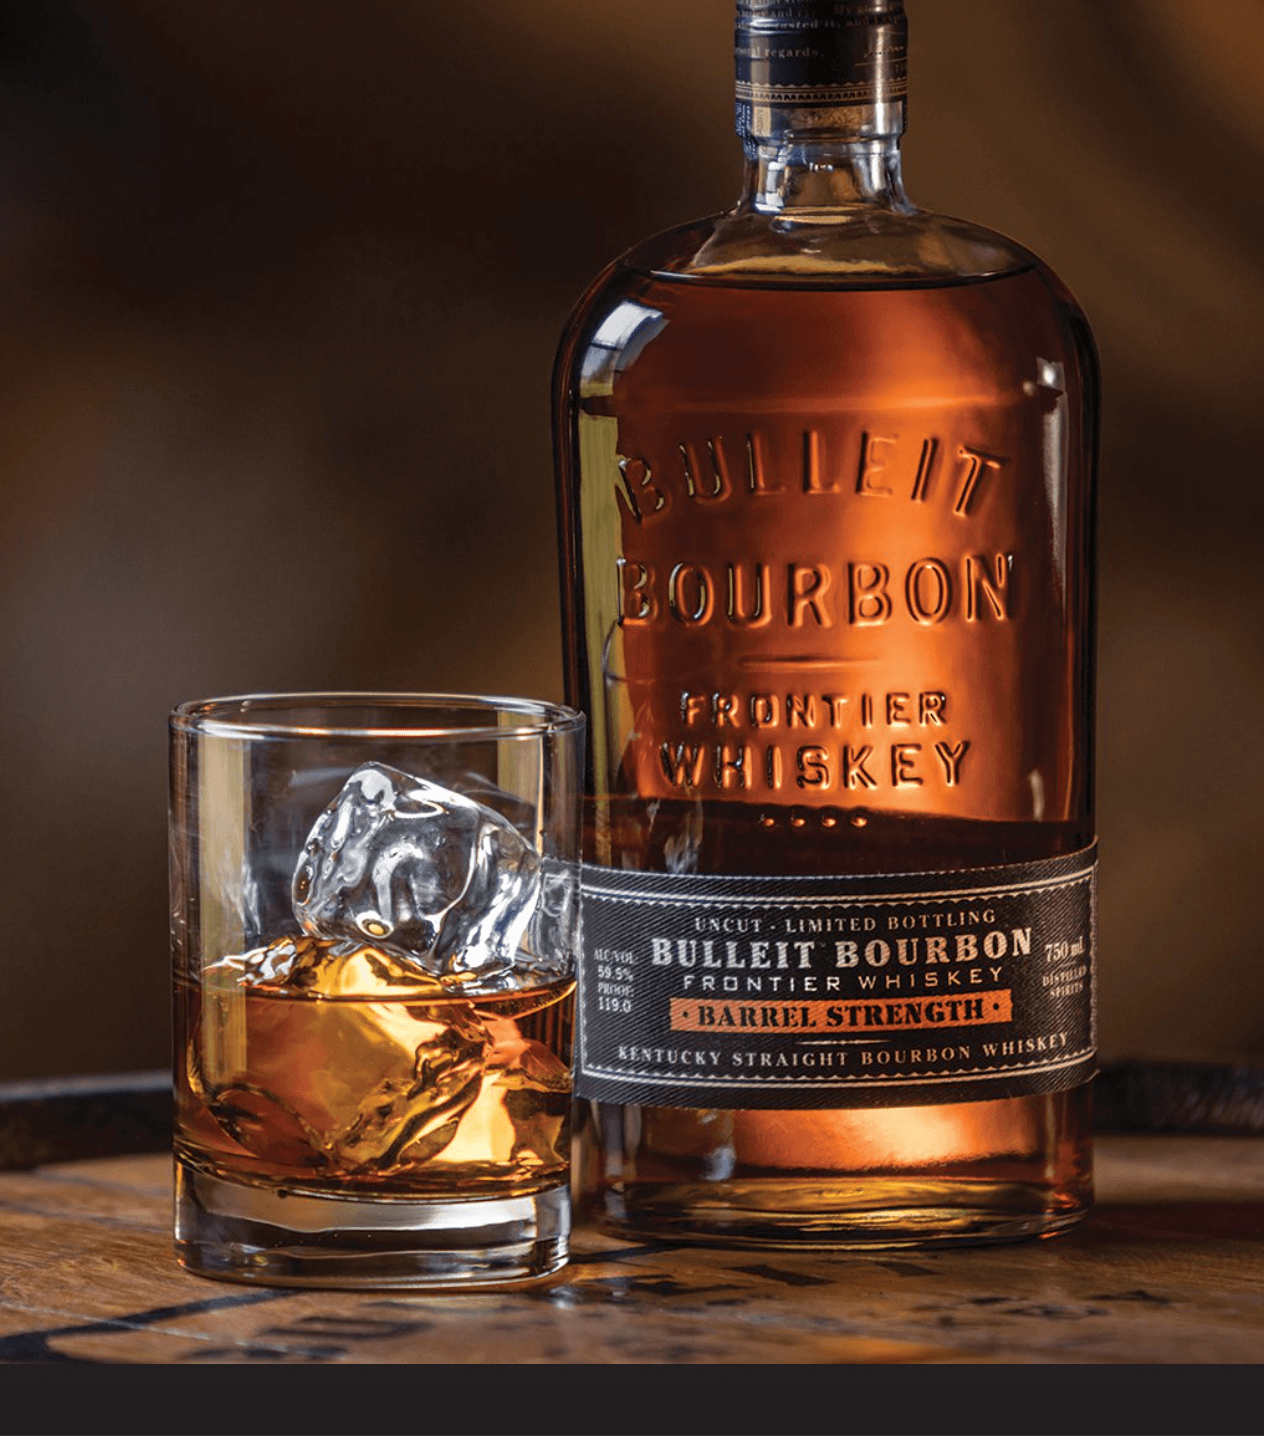 A fun way to start your decision making process is with a glass of Bulleit Bourbon Whiskey